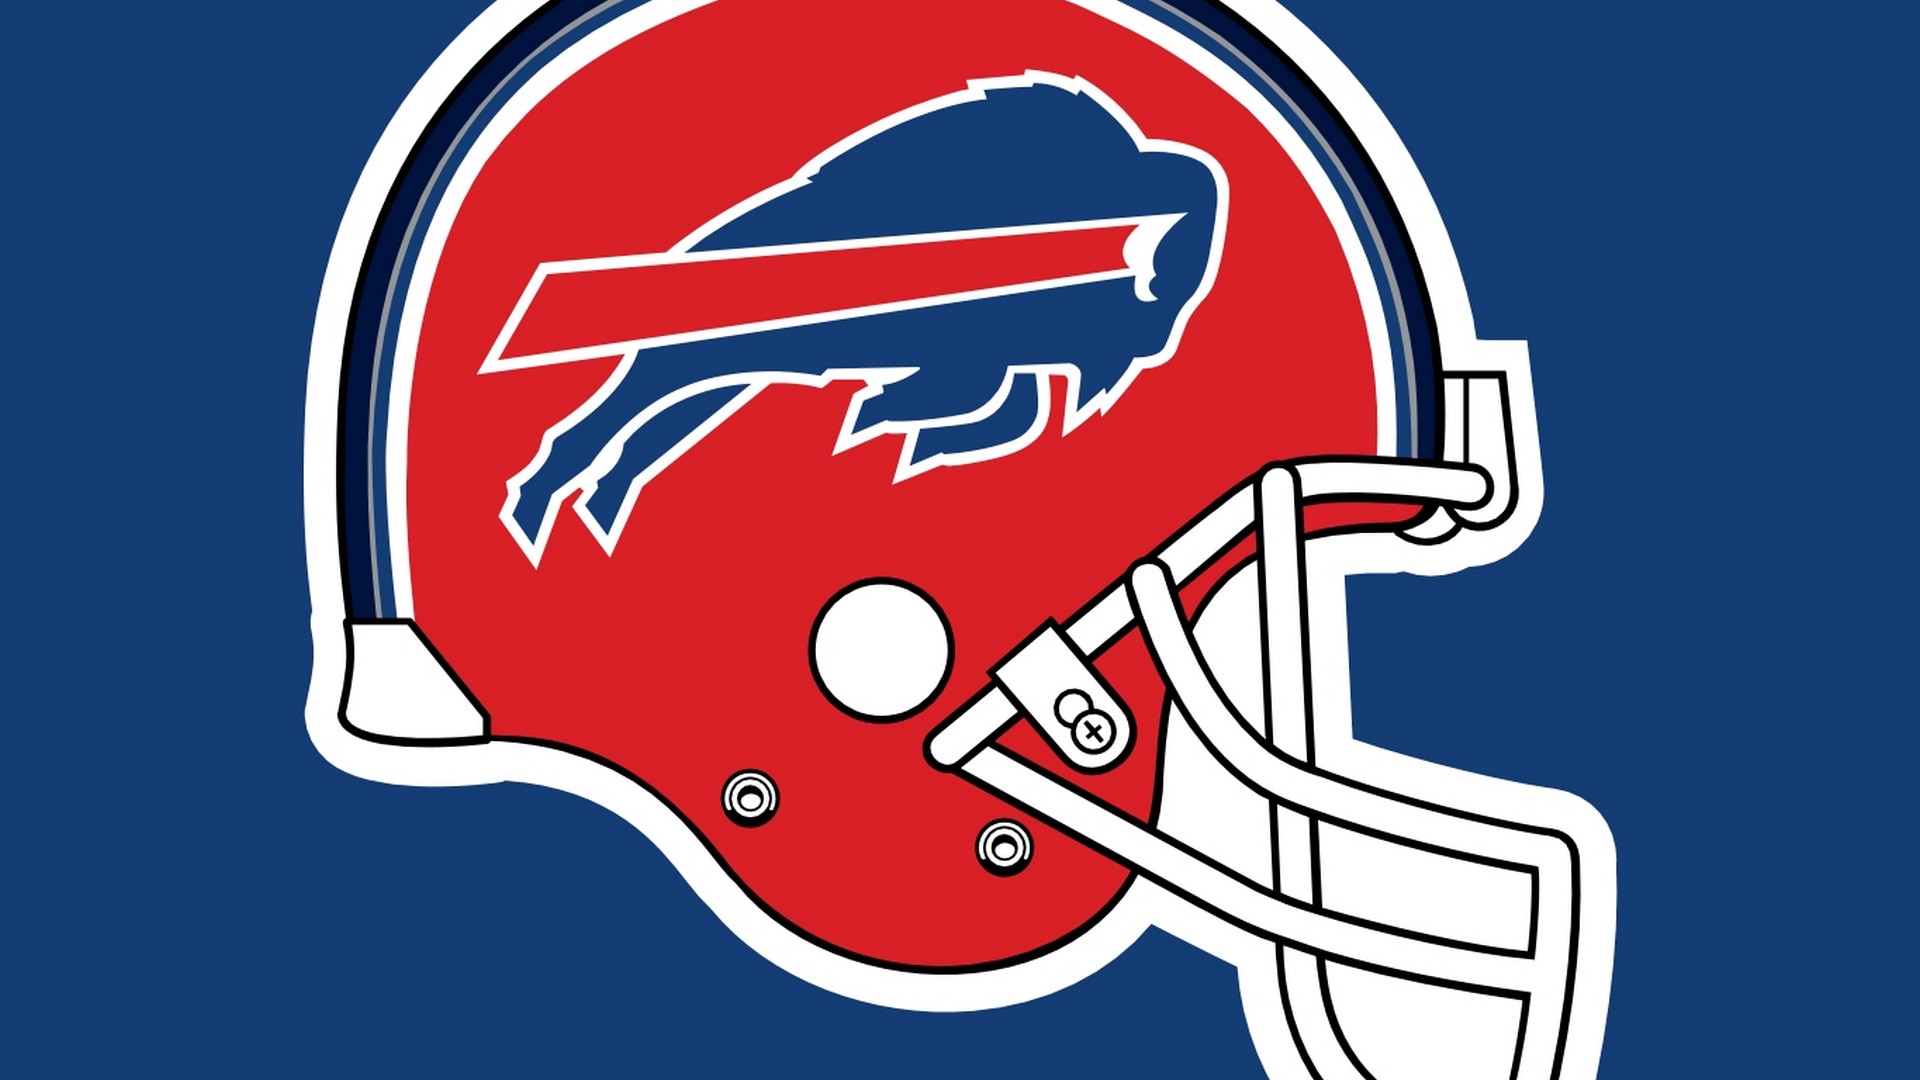 HD Desktop Wallpaper Buffalo Bills NFL with high-resolution 1920x1080 pixel. You can use this wallpaper for your Mac or Windows Desktop Background, iPhone, Android or Tablet and another Smartphone device